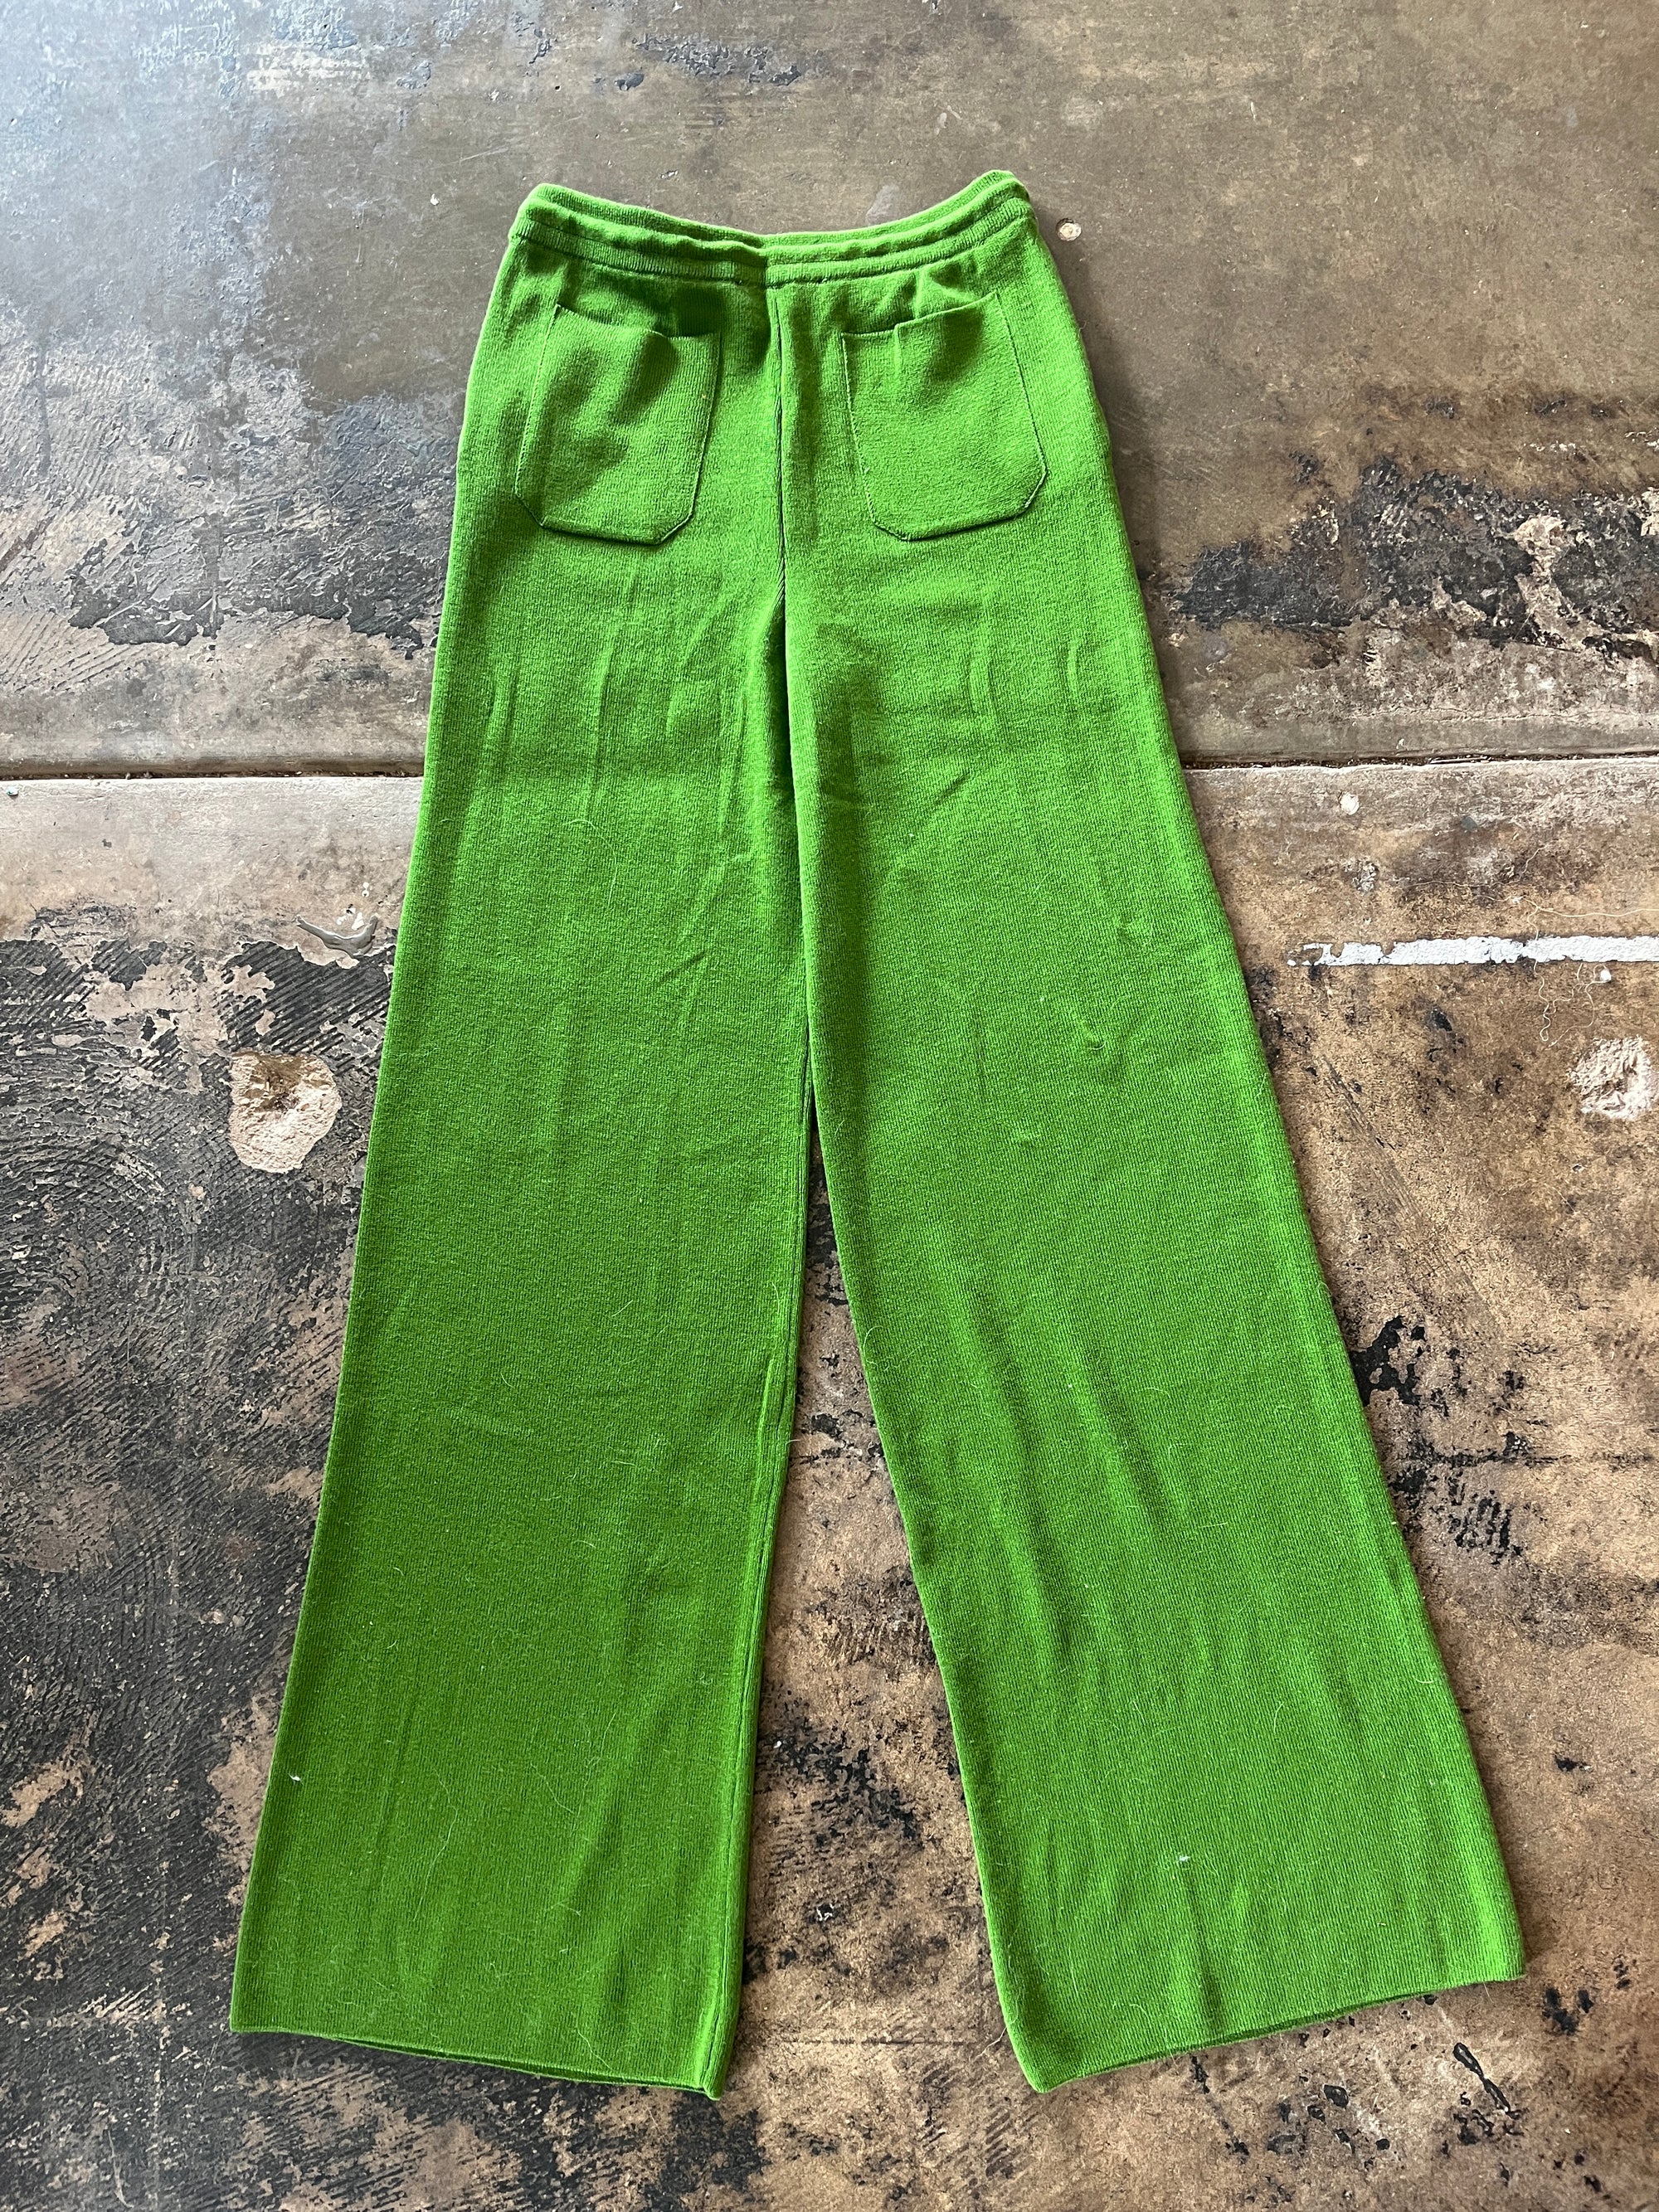 Heavy Manners Green Knit Pants